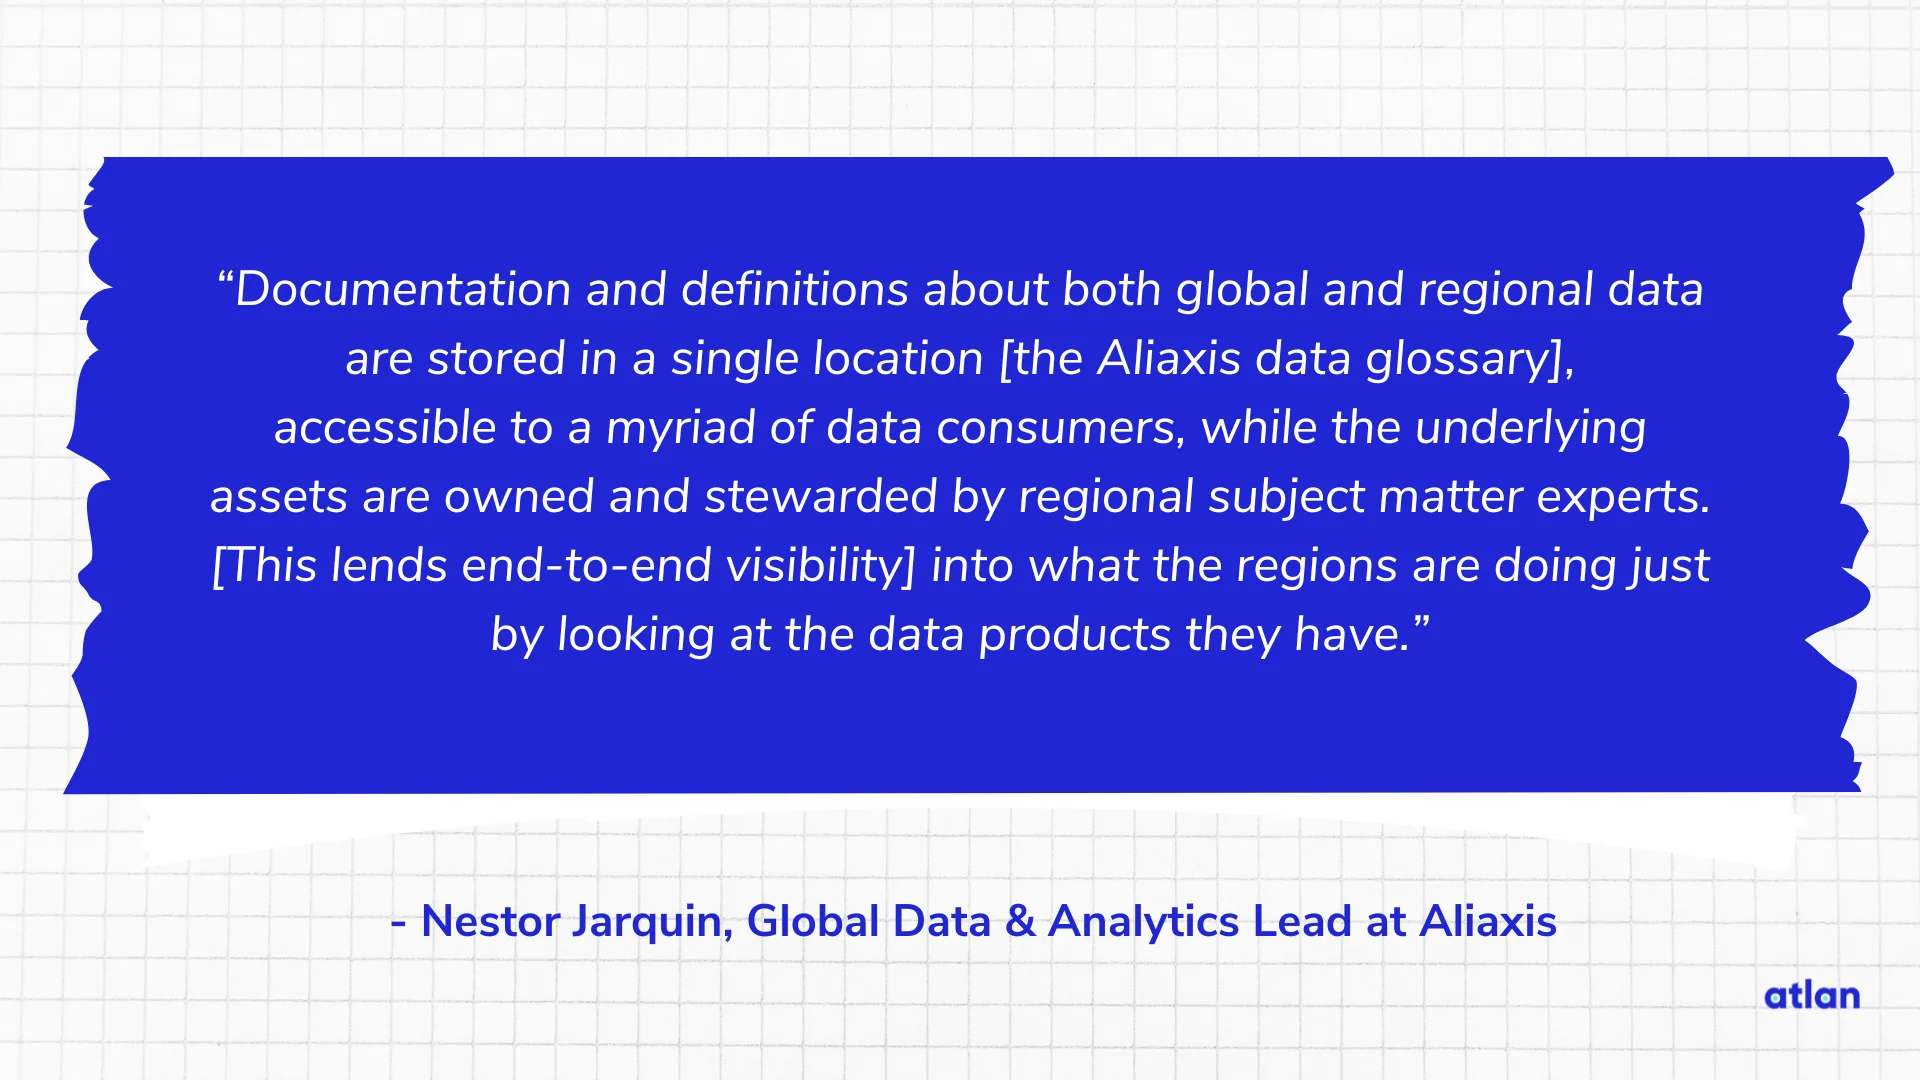 Nestor Jarquin, Global Data & Analytics Lead at Aliaxis on business glossary benefits